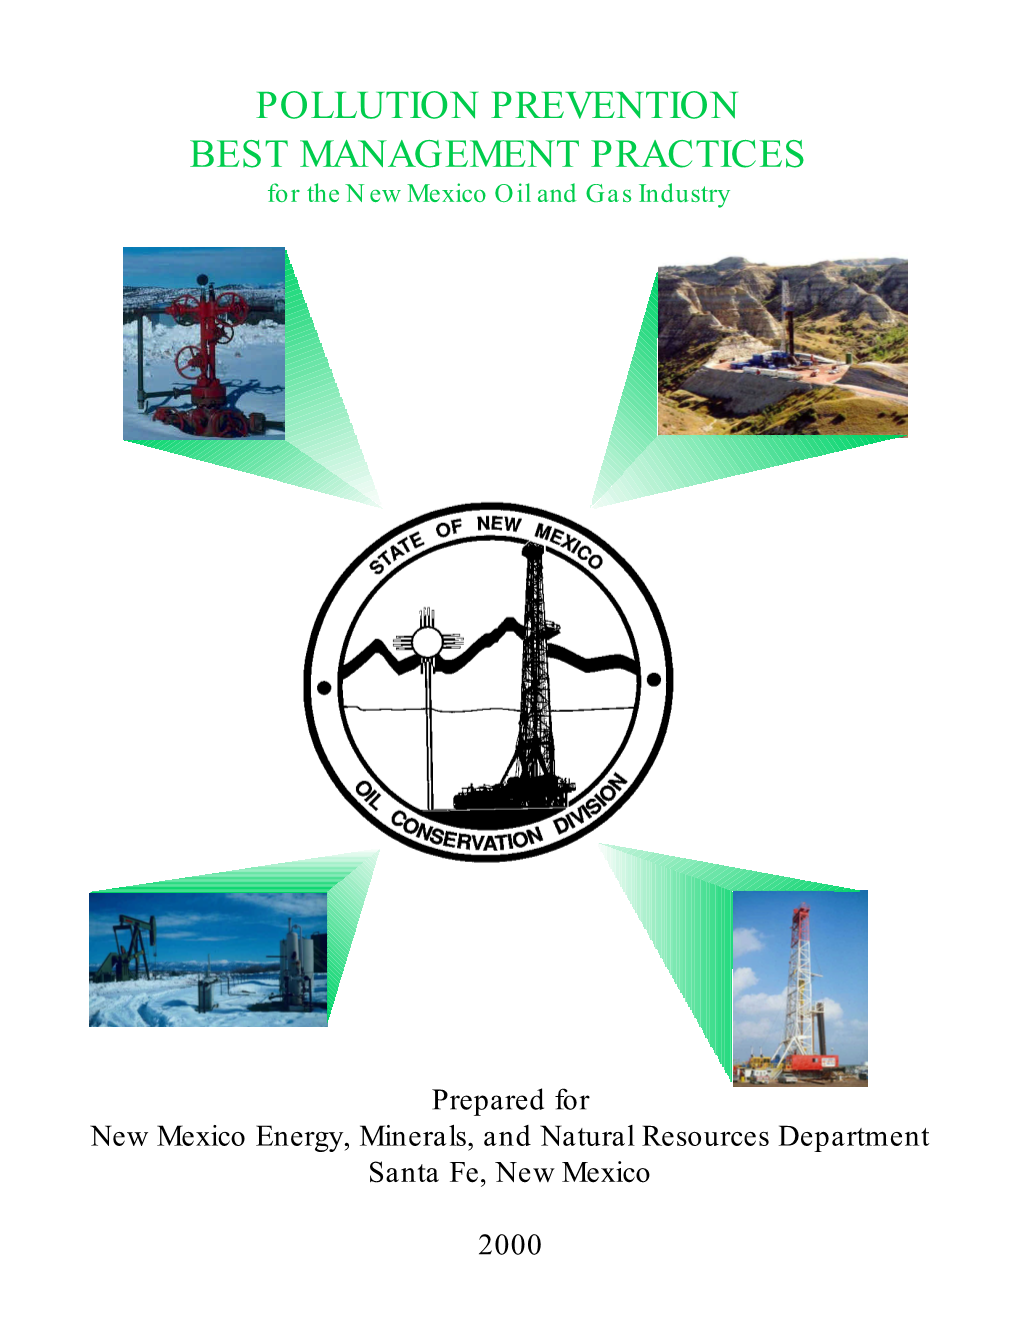 POLLUTION PREVENTION BEST MANAGEMENT PRACTICES for the New Mexico Oil and Gas Industry